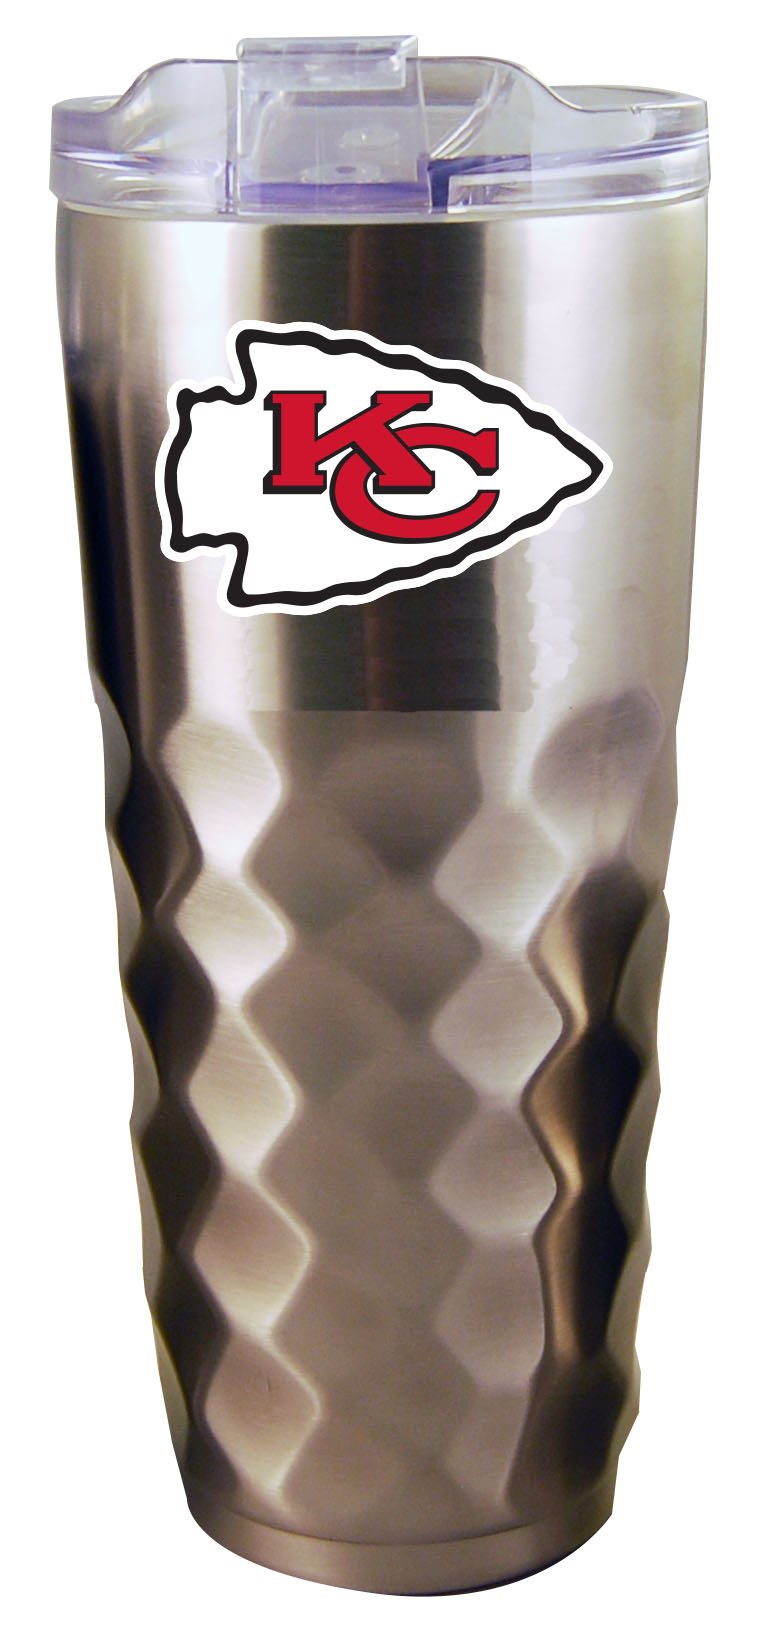 32OZ SS DIAMD TMBLR CHIEFS
CurrentProduct, Drinkware_category_All, Kansas City Chiefs, KCC, NFL
The Memory Company